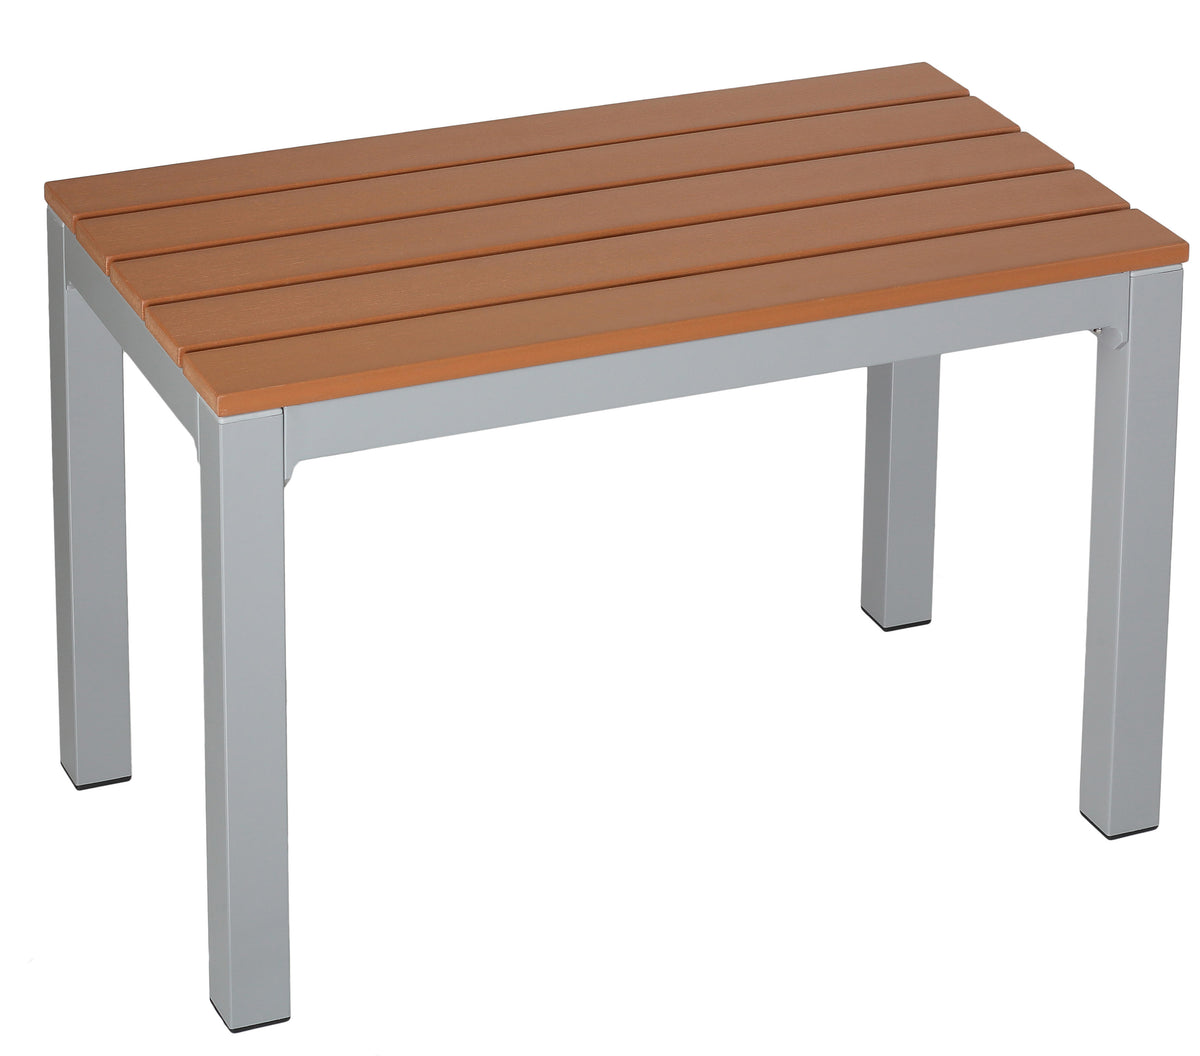 Cortesi Home Avery Aluminum Outdoor Bench in Poly Resin, Silver/Teak